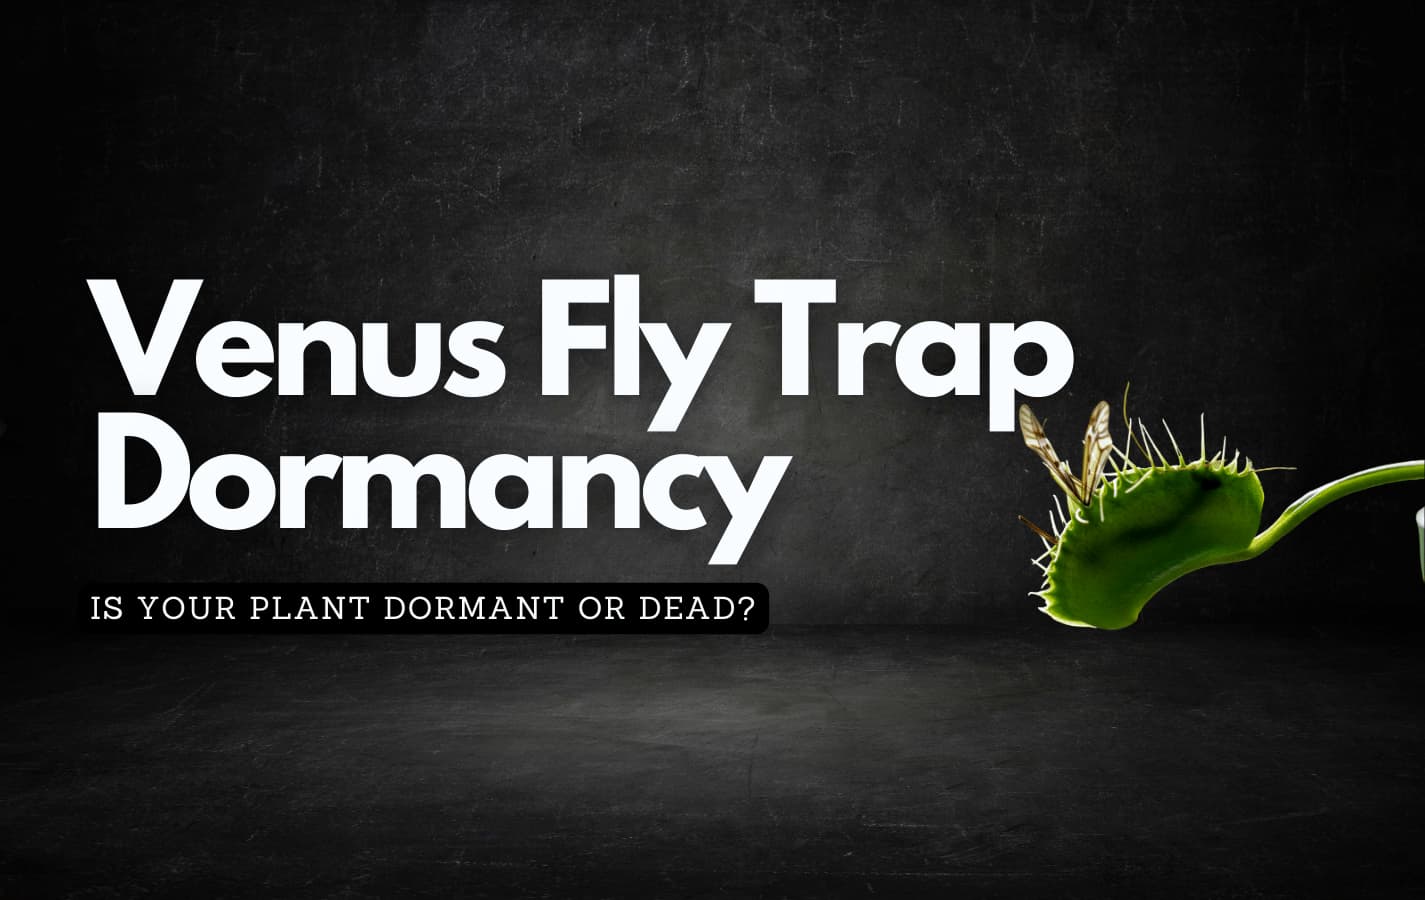 Revealed: The Tell-Tale Signs of a Dormant Venus Fly Trap